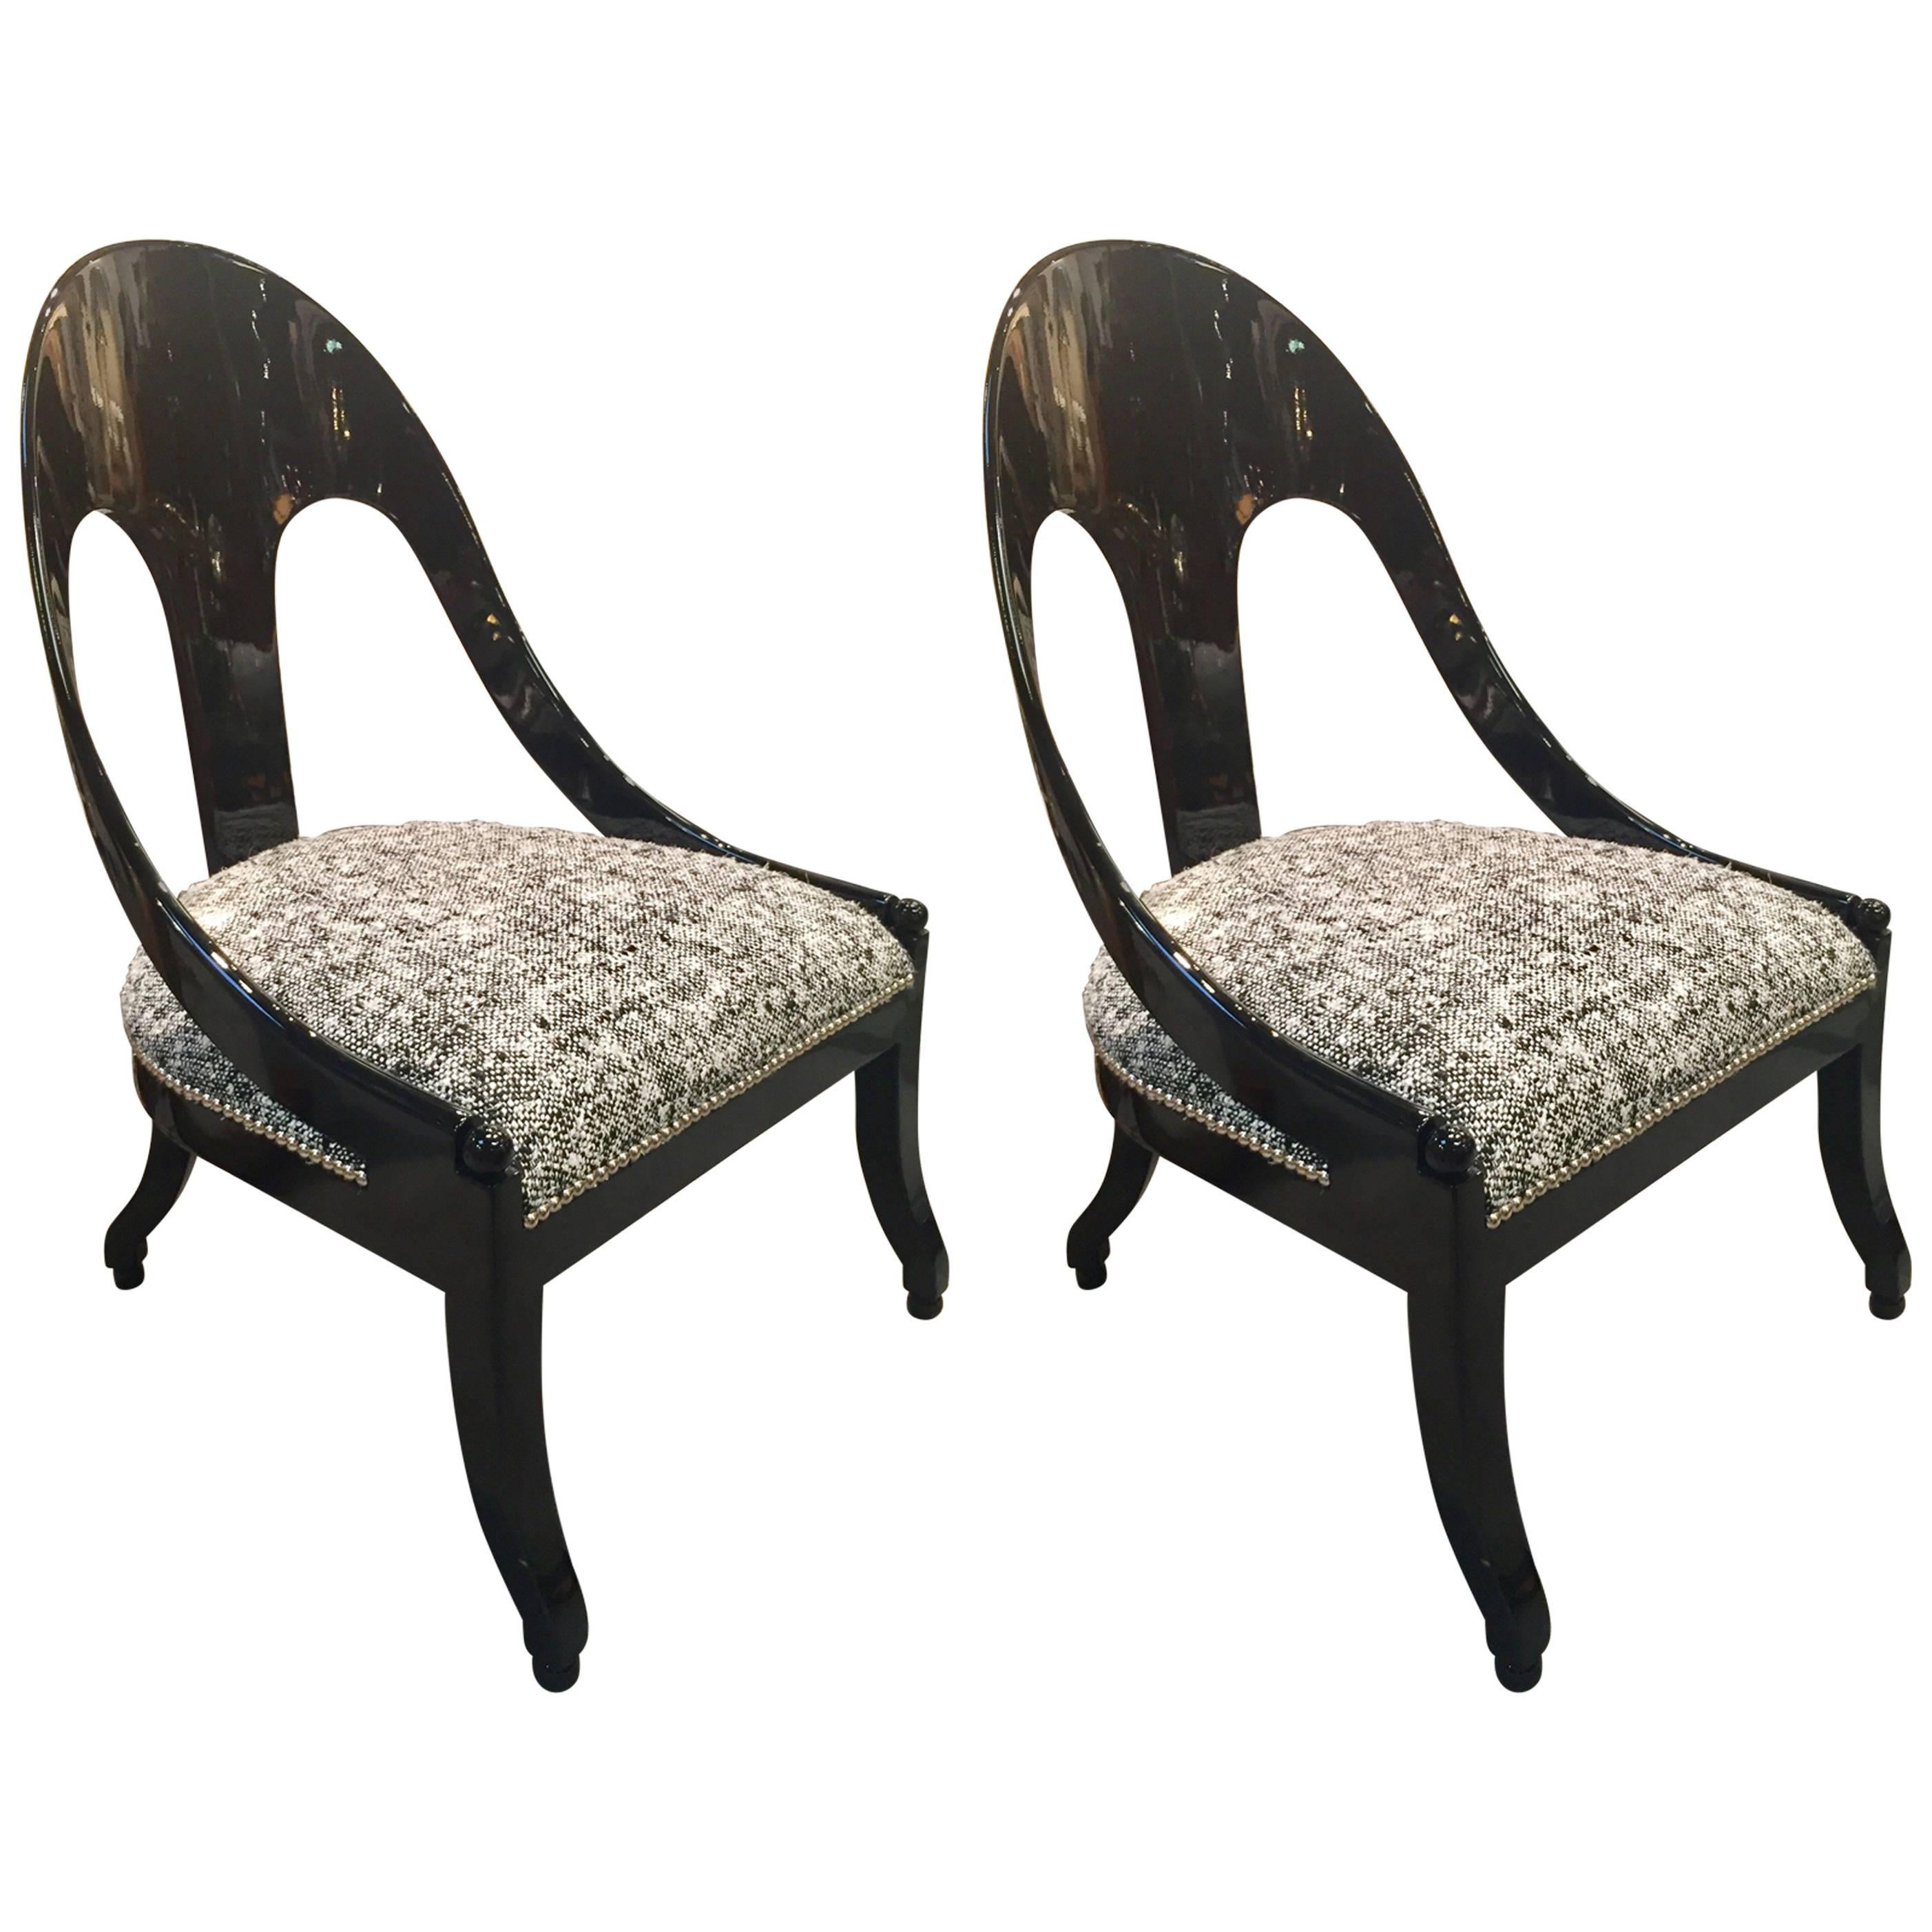 Pair of Spoon Back Chairs